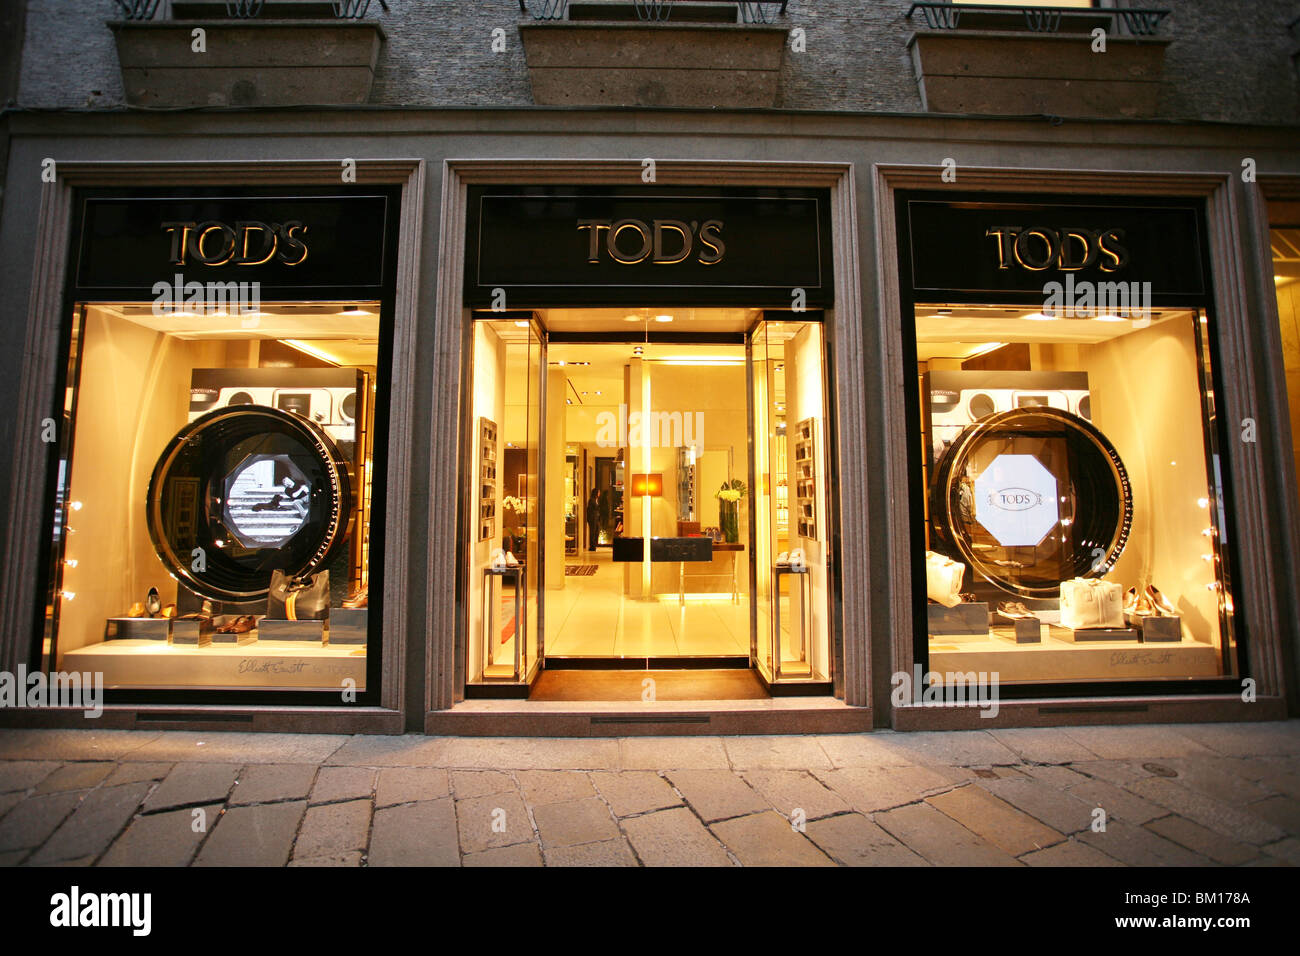 tods stores